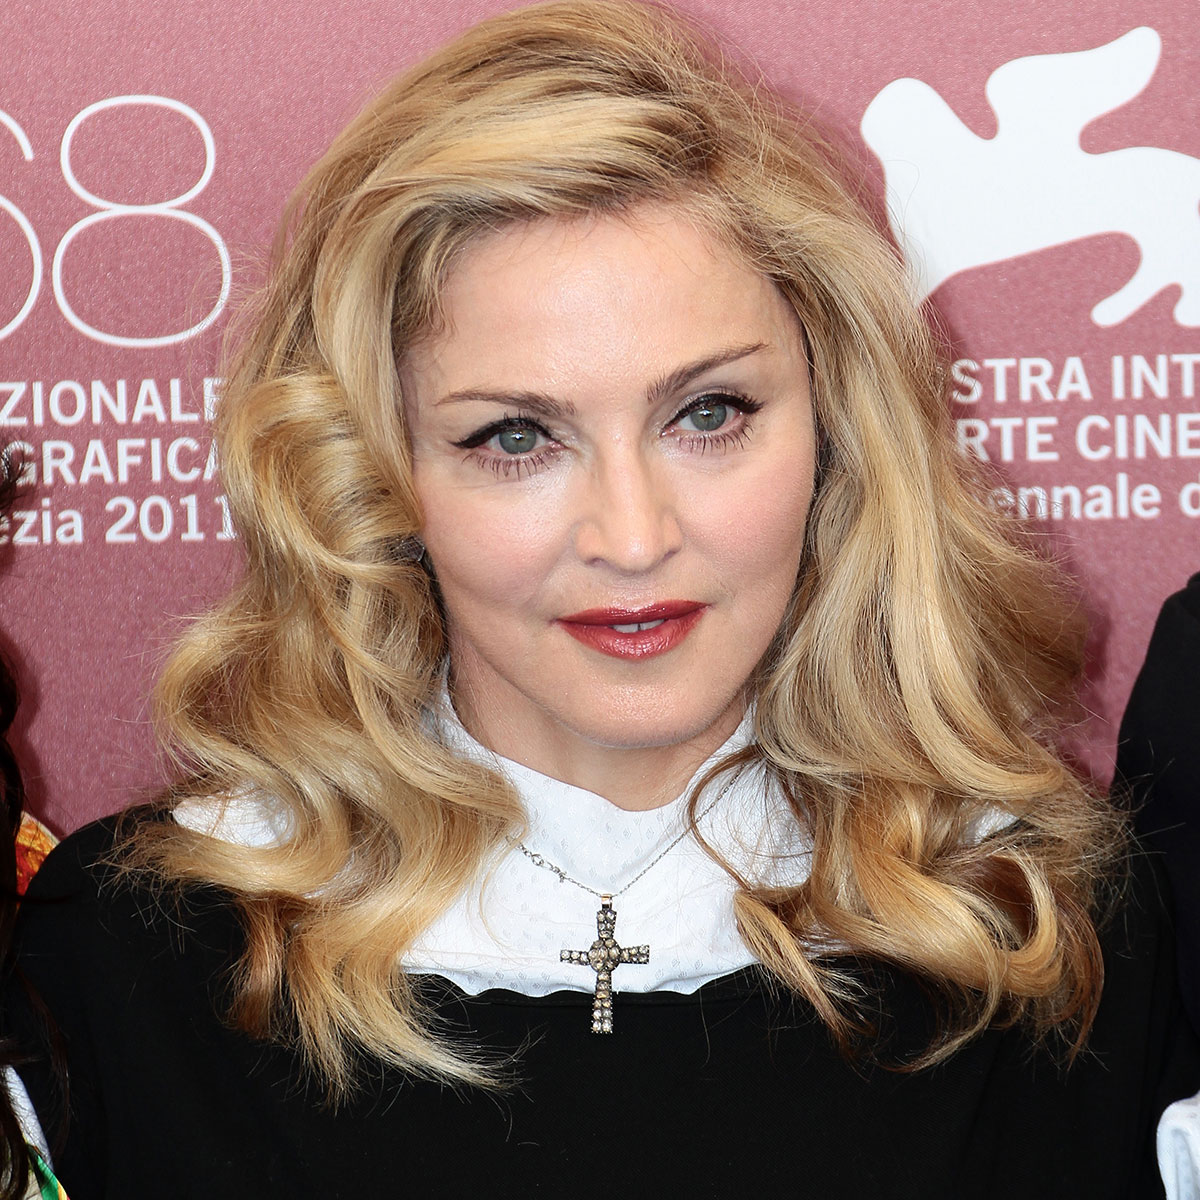 Fans Are Calling Madonna’s Face ‘Unrecognizable’ In New Instagram Post: ‘She Looks Like A Bratz Doll’